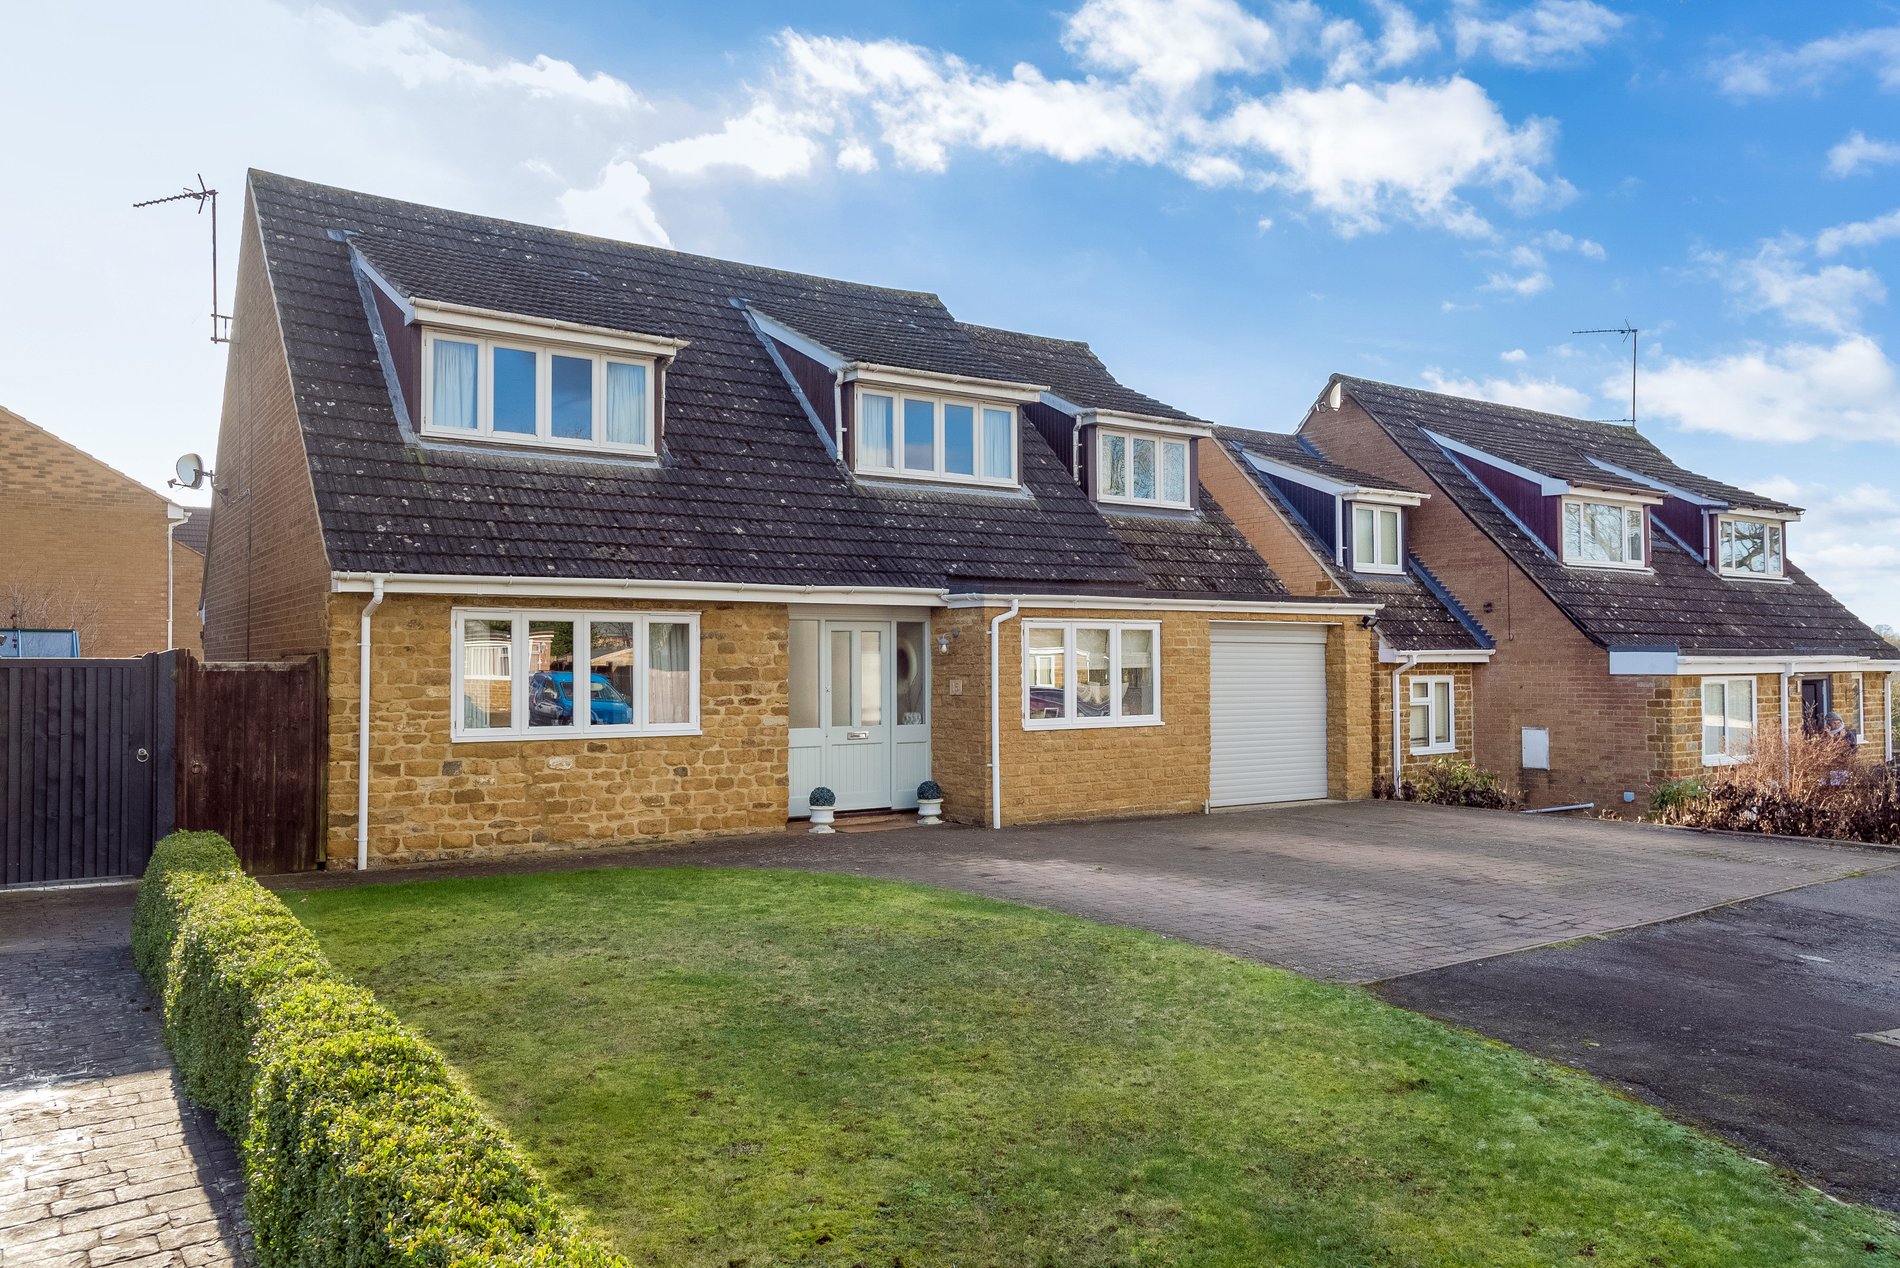 4 bed detached house for sale in The Moors Drive, Middleton Cheney - Property Image 1